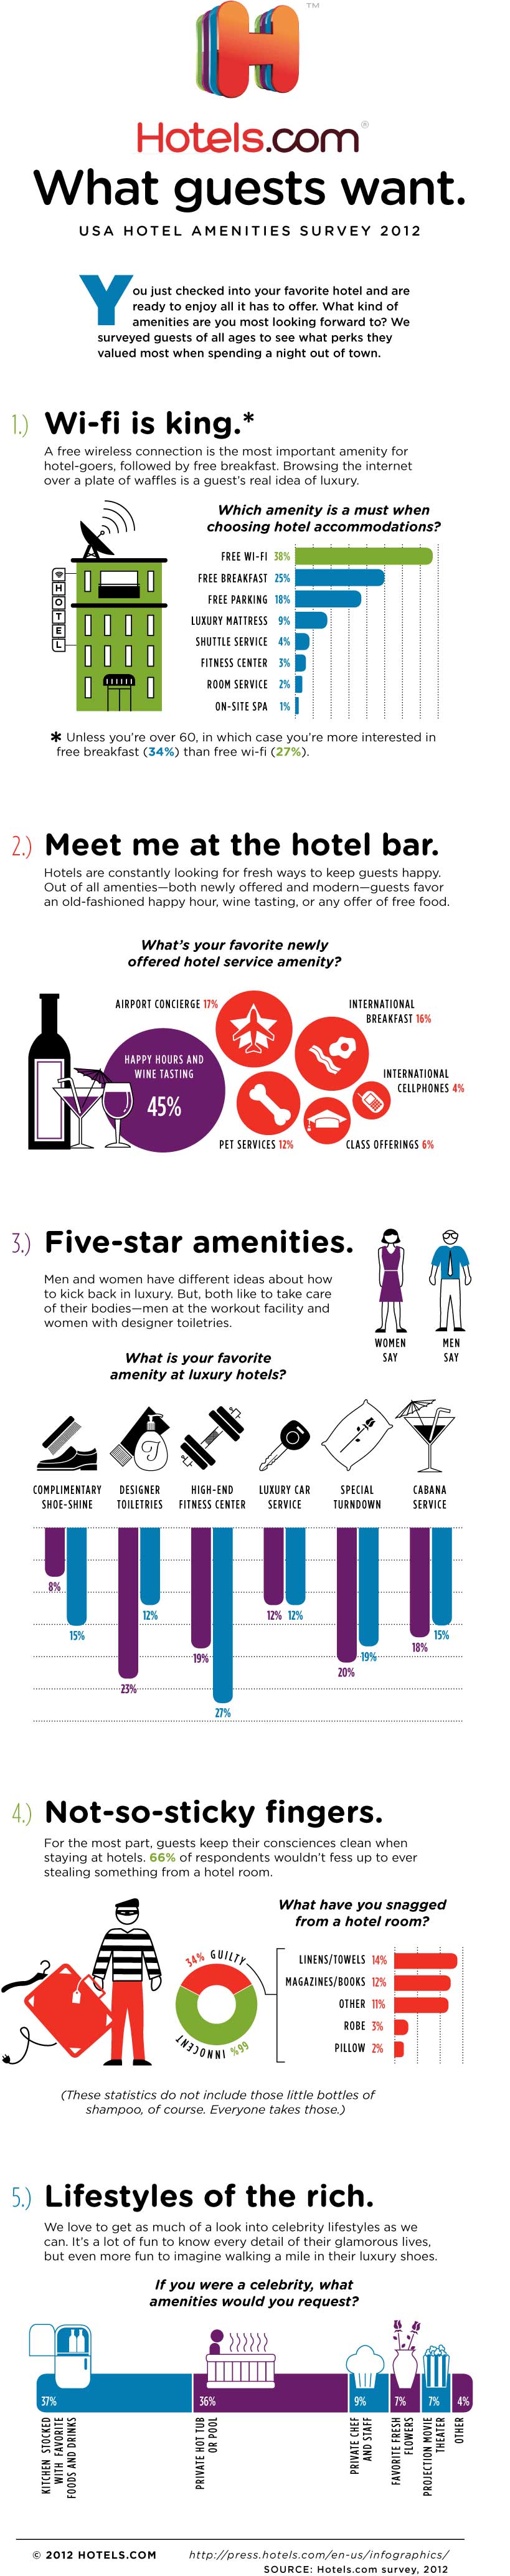 USA Hotel Amenities Survey - What Do Guests Want?